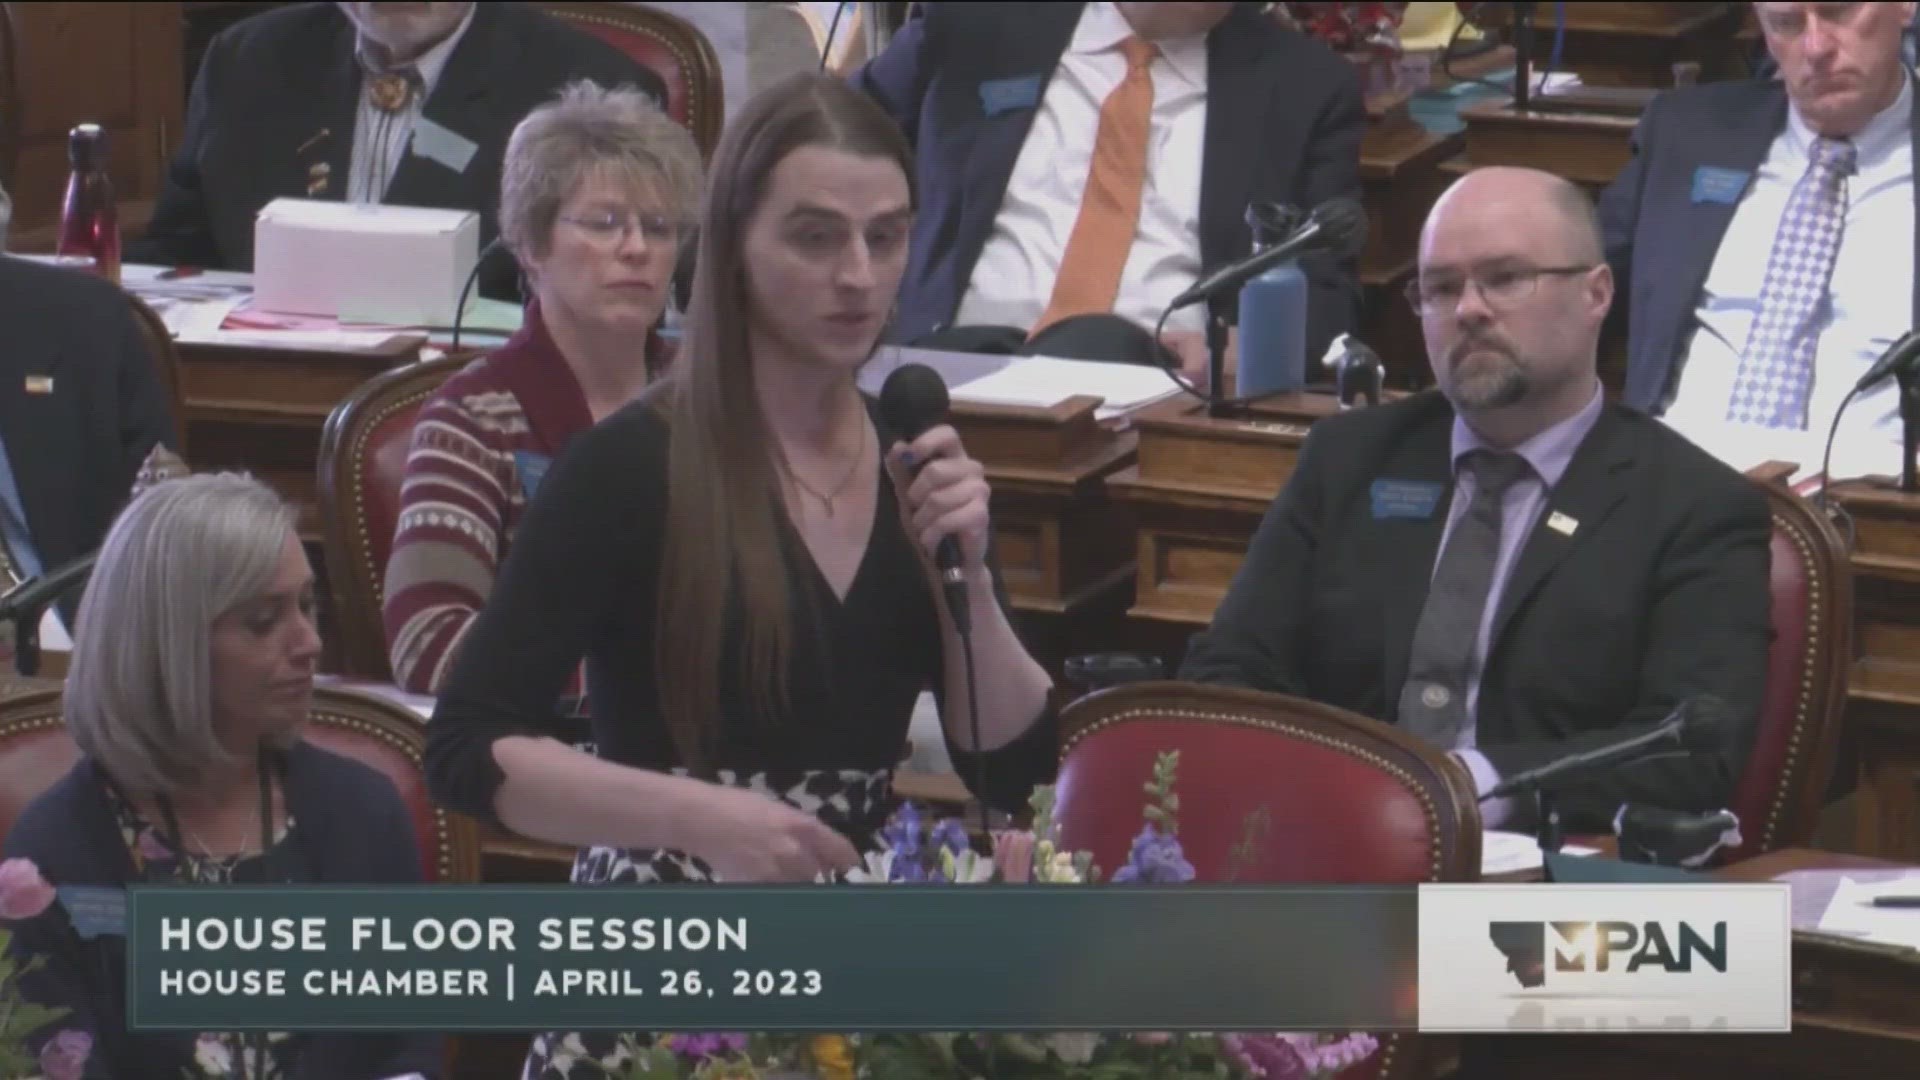 The Montana House Speaker previously demanded Zephyr apologize for comments she made against a bill to ban gender-affirming medical care for children.